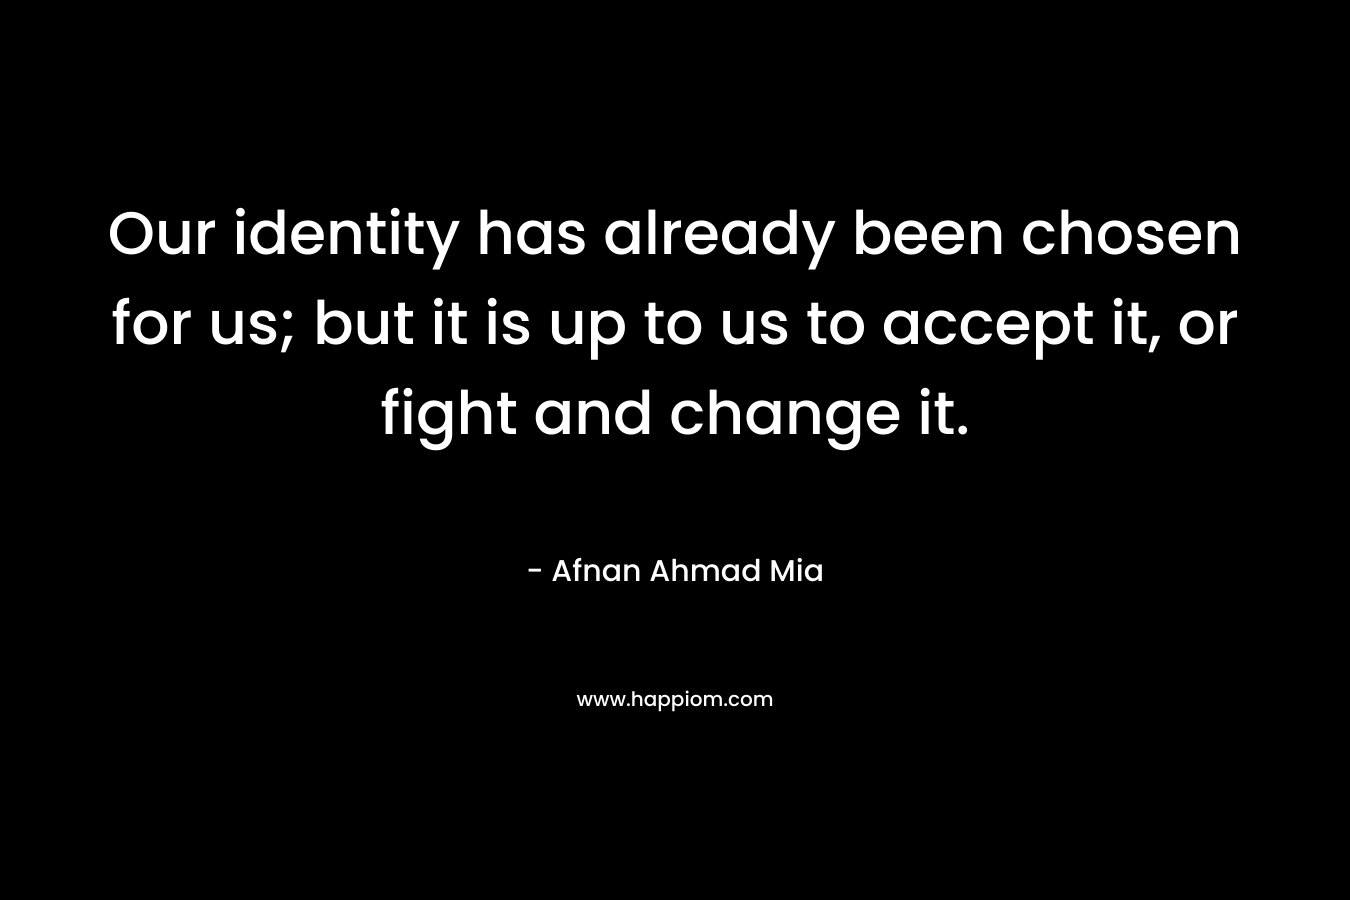 Our identity has already been chosen for us; but it is up to us to accept it, or fight and change it. – Afnan Ahmad Mia